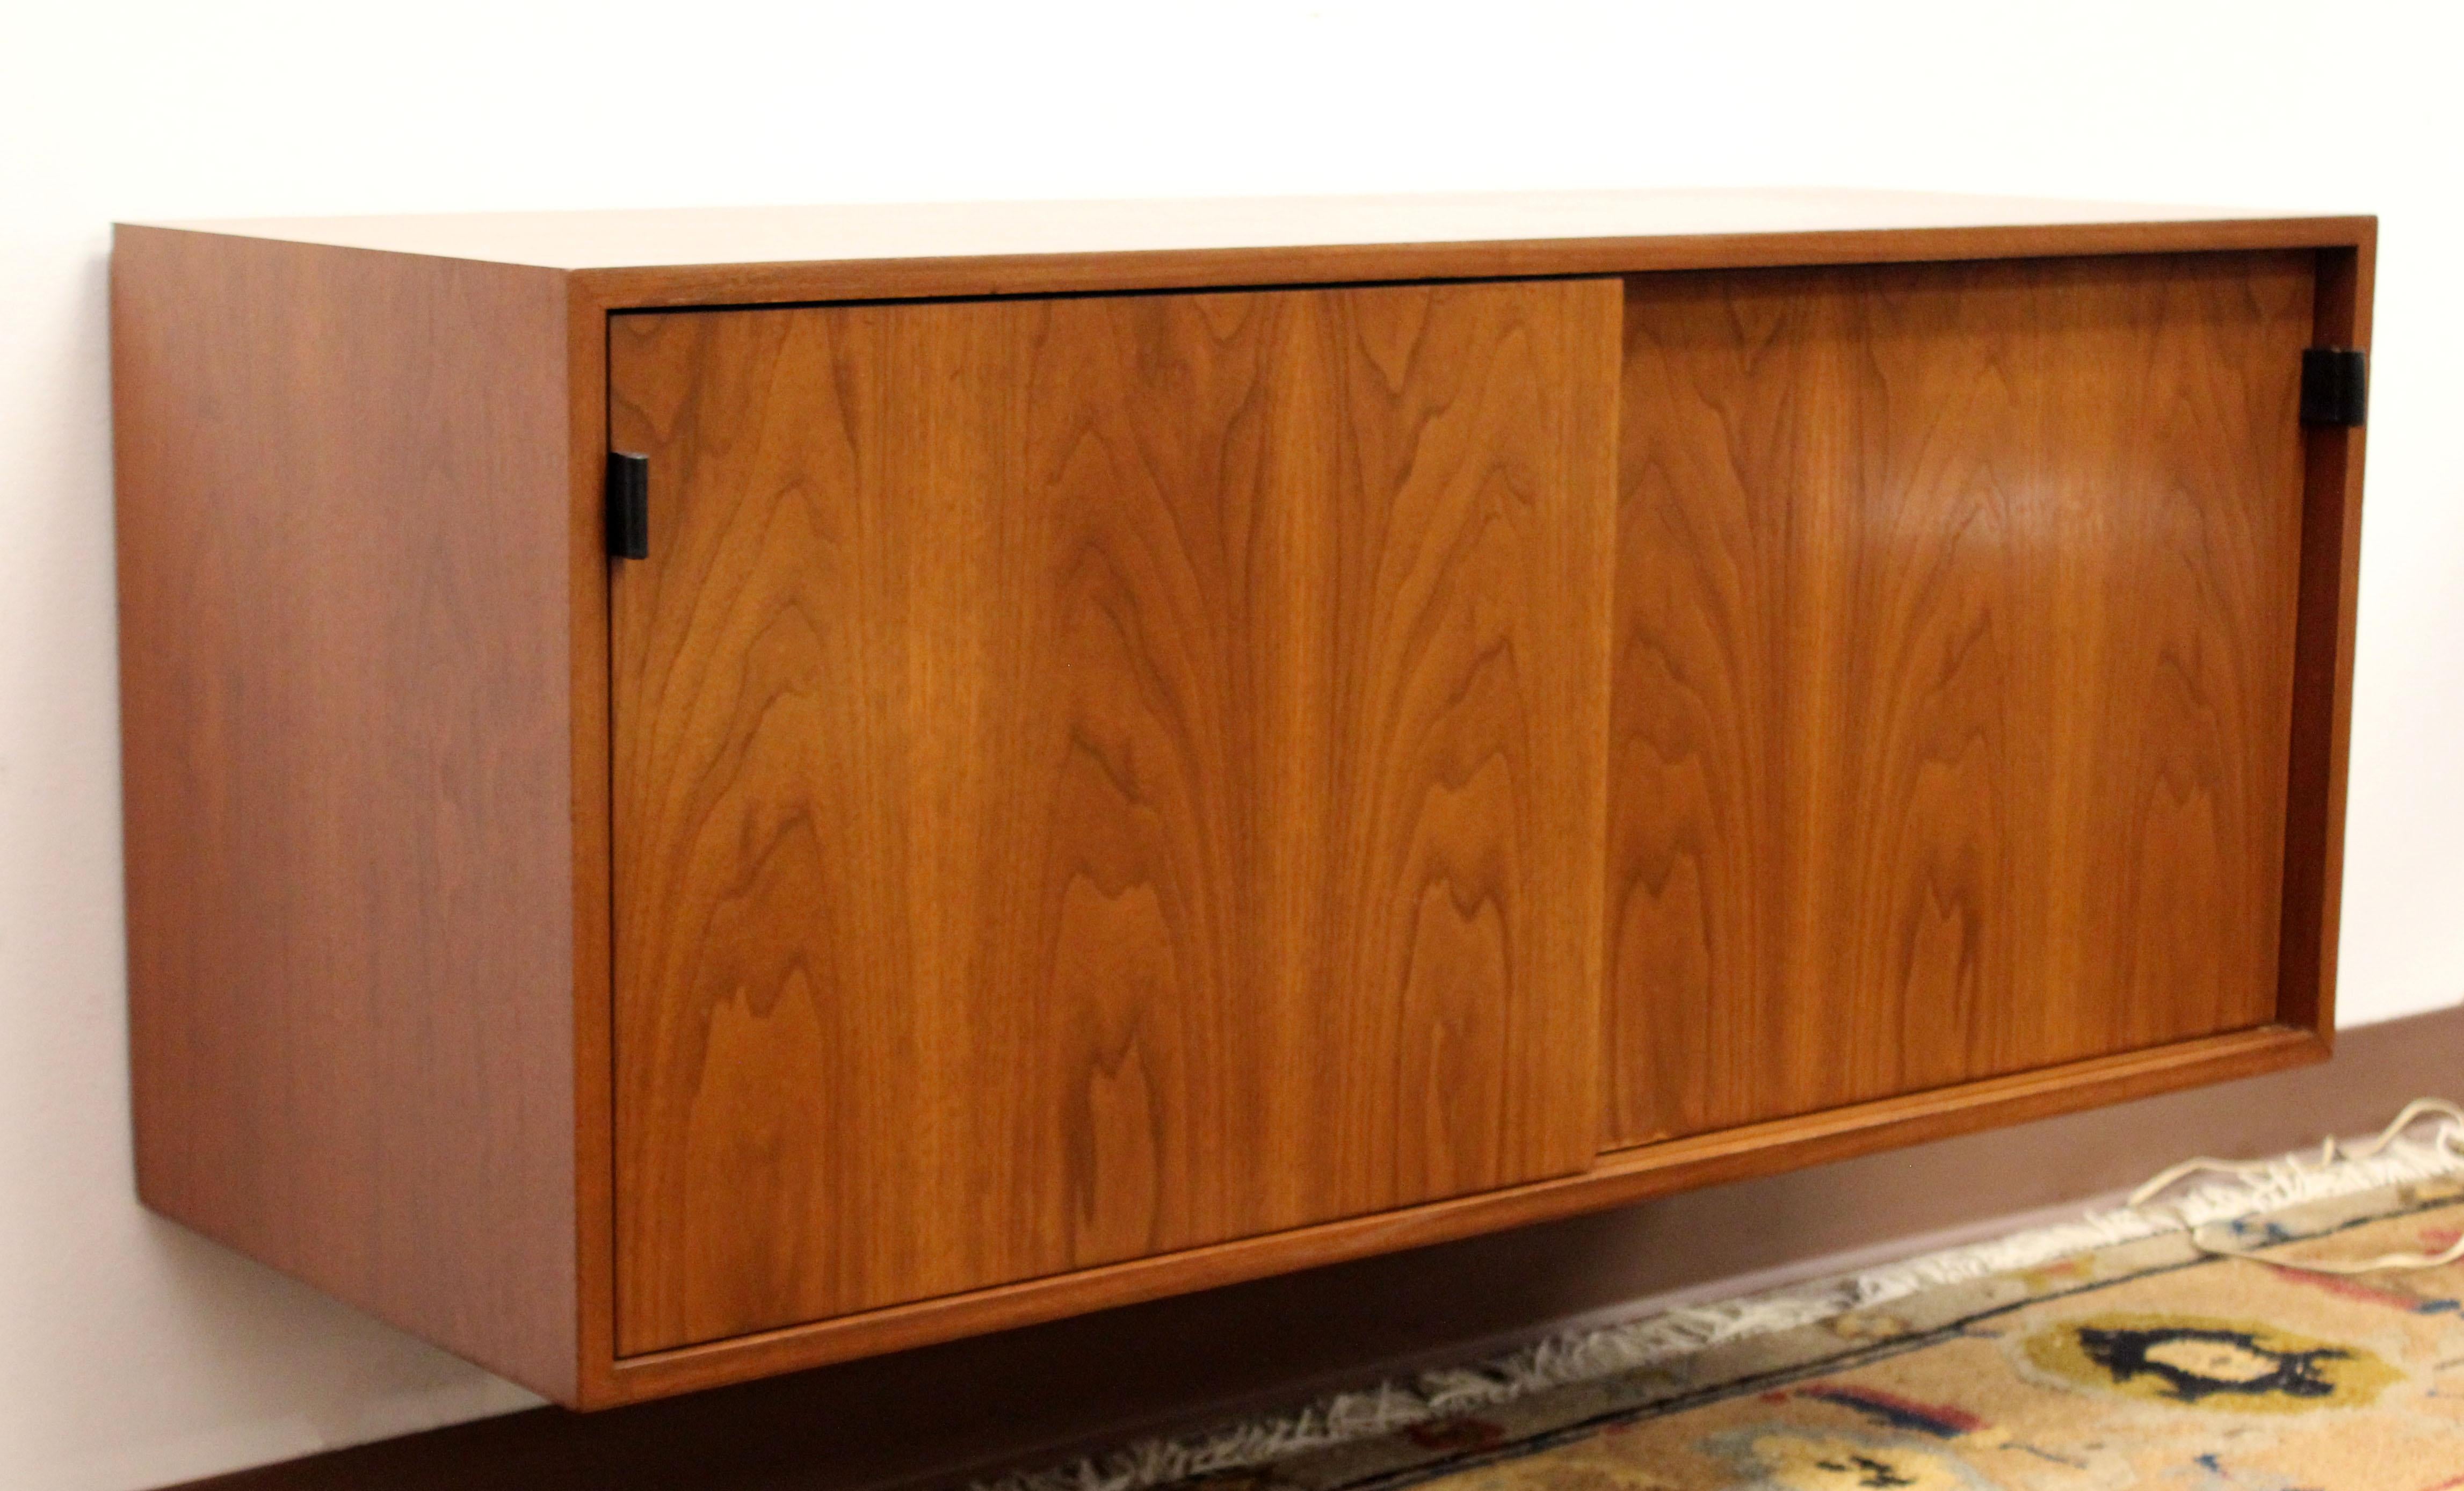 For your consideration is a fabulous rare vintage hanging floating wall unit cabinet, with sliding doors, made of walnut, by Florence Knoll, circa the 1960s. In excellent condition. The dimensions are 48